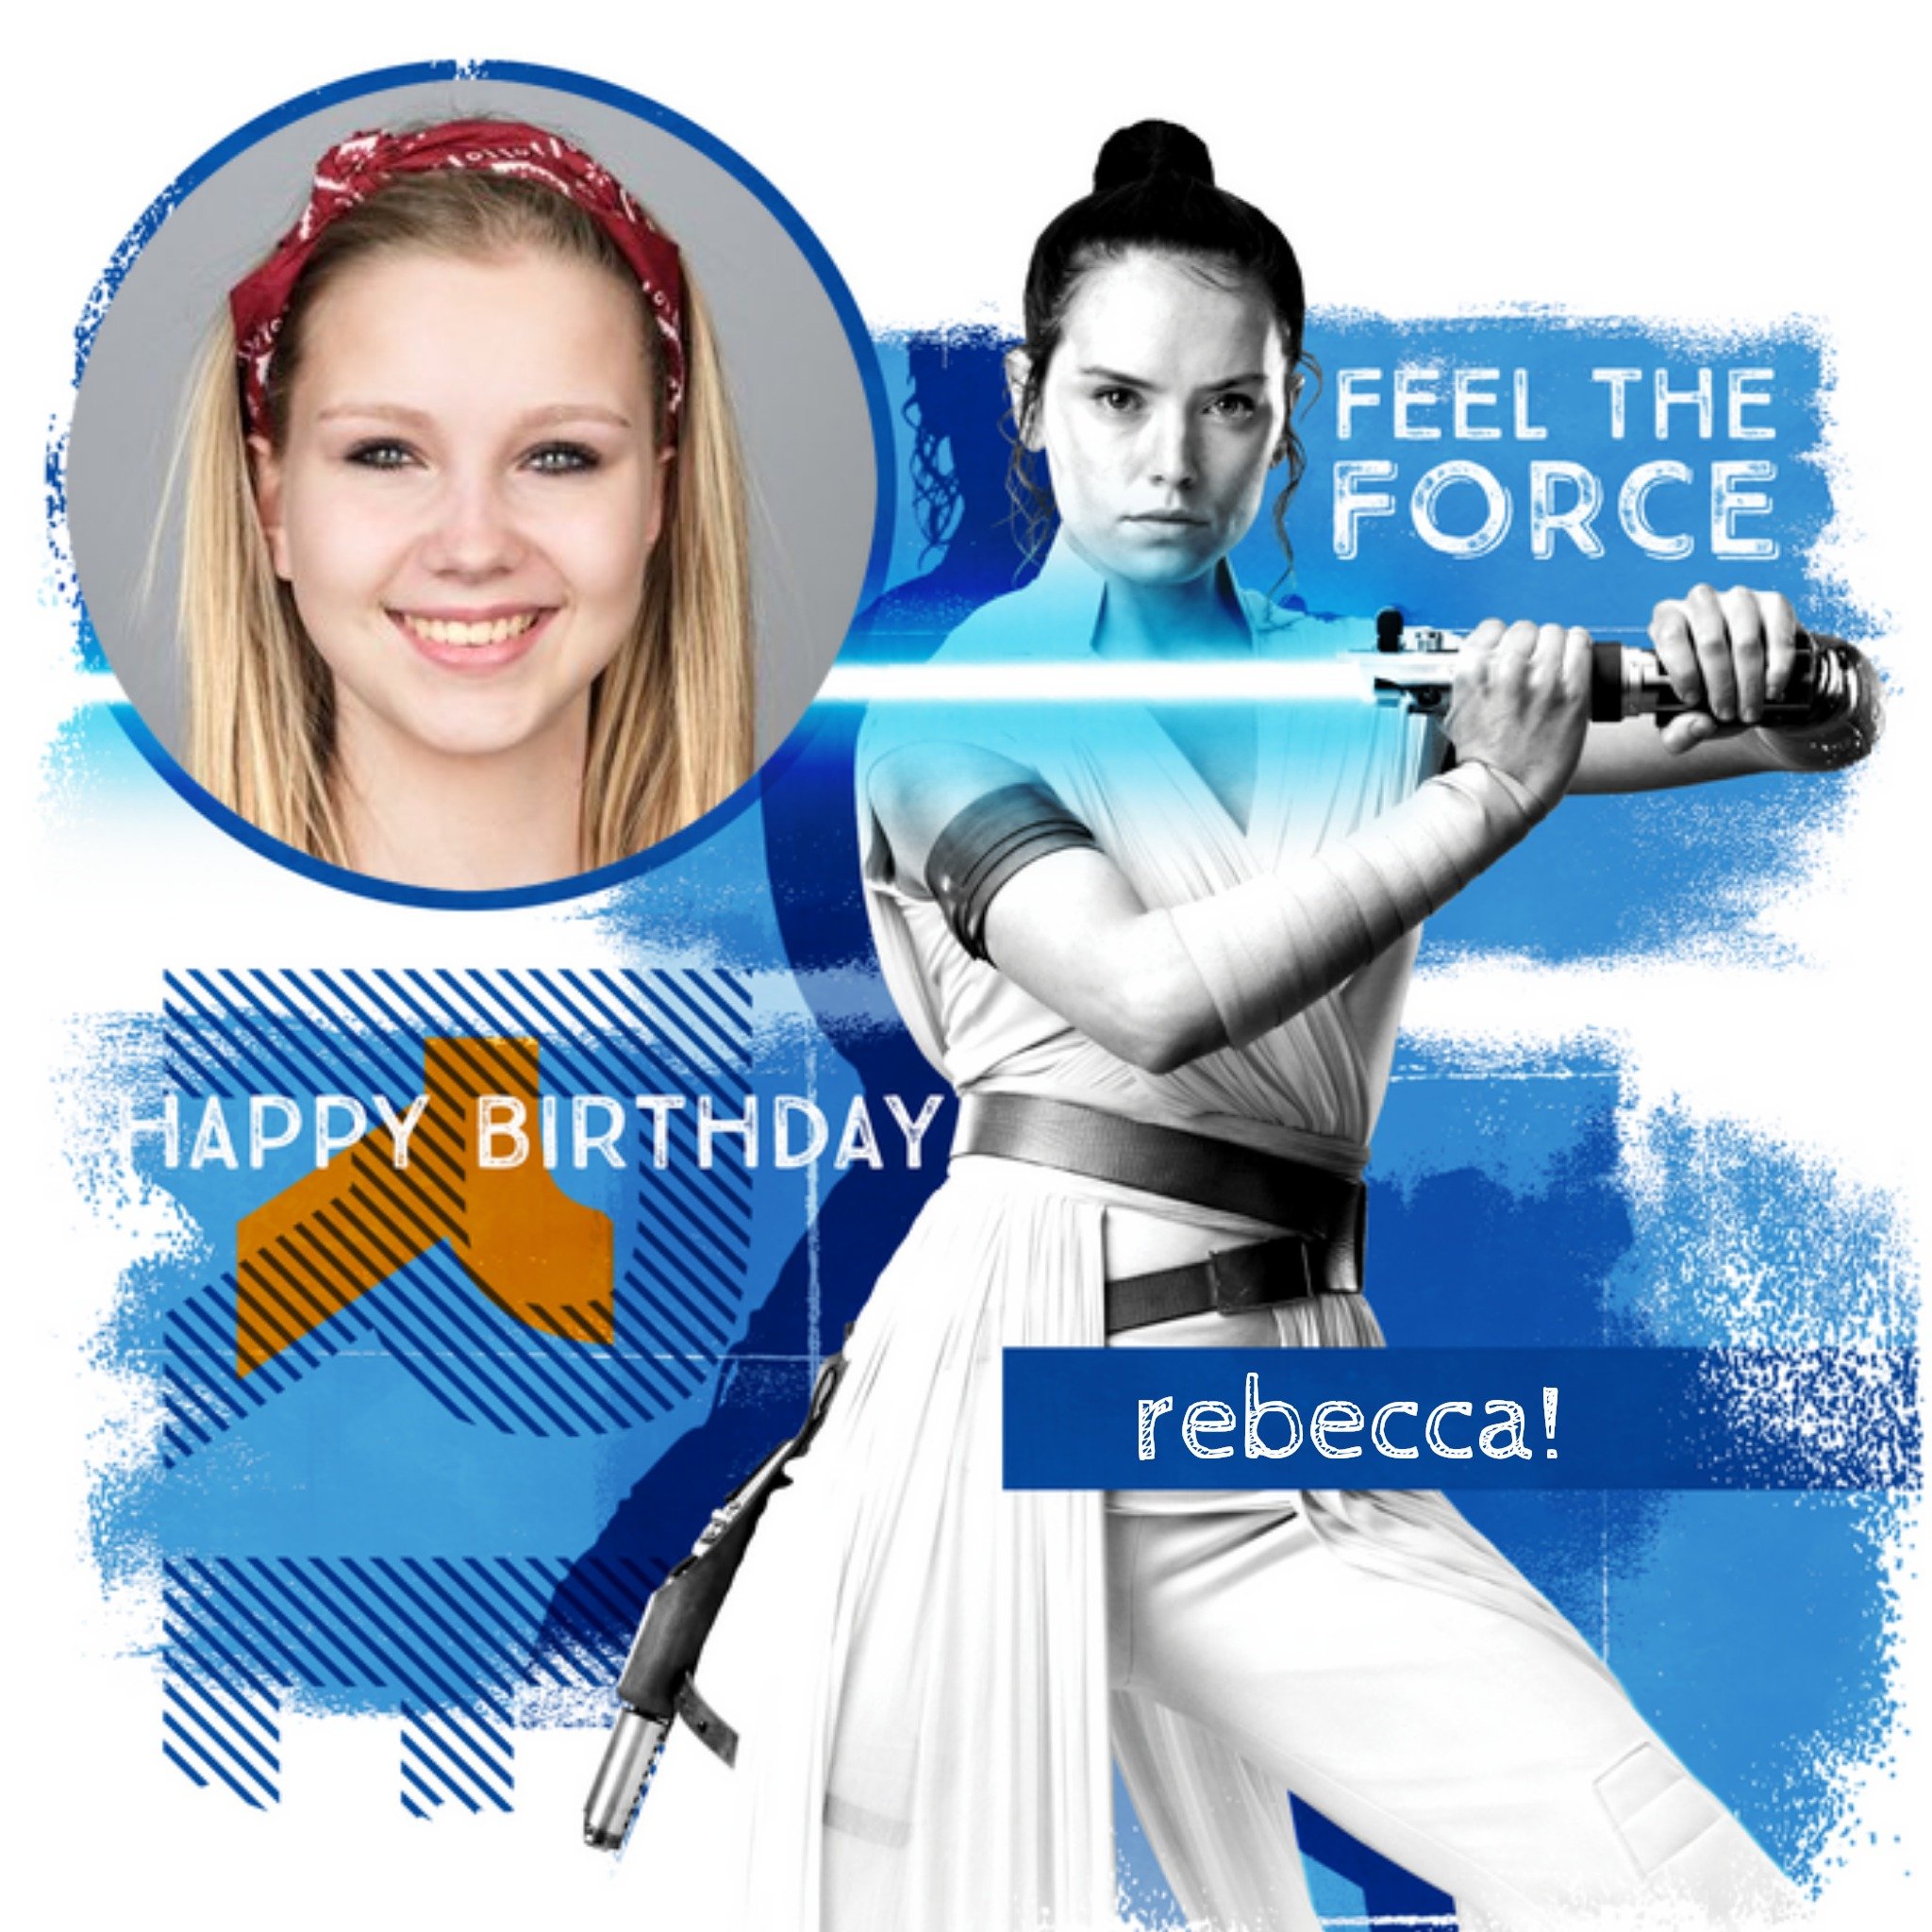 Disney Star Wars Episode 9 The Rise Of Skywalker Rey Personalised Photo Upload Birthday Card, Square